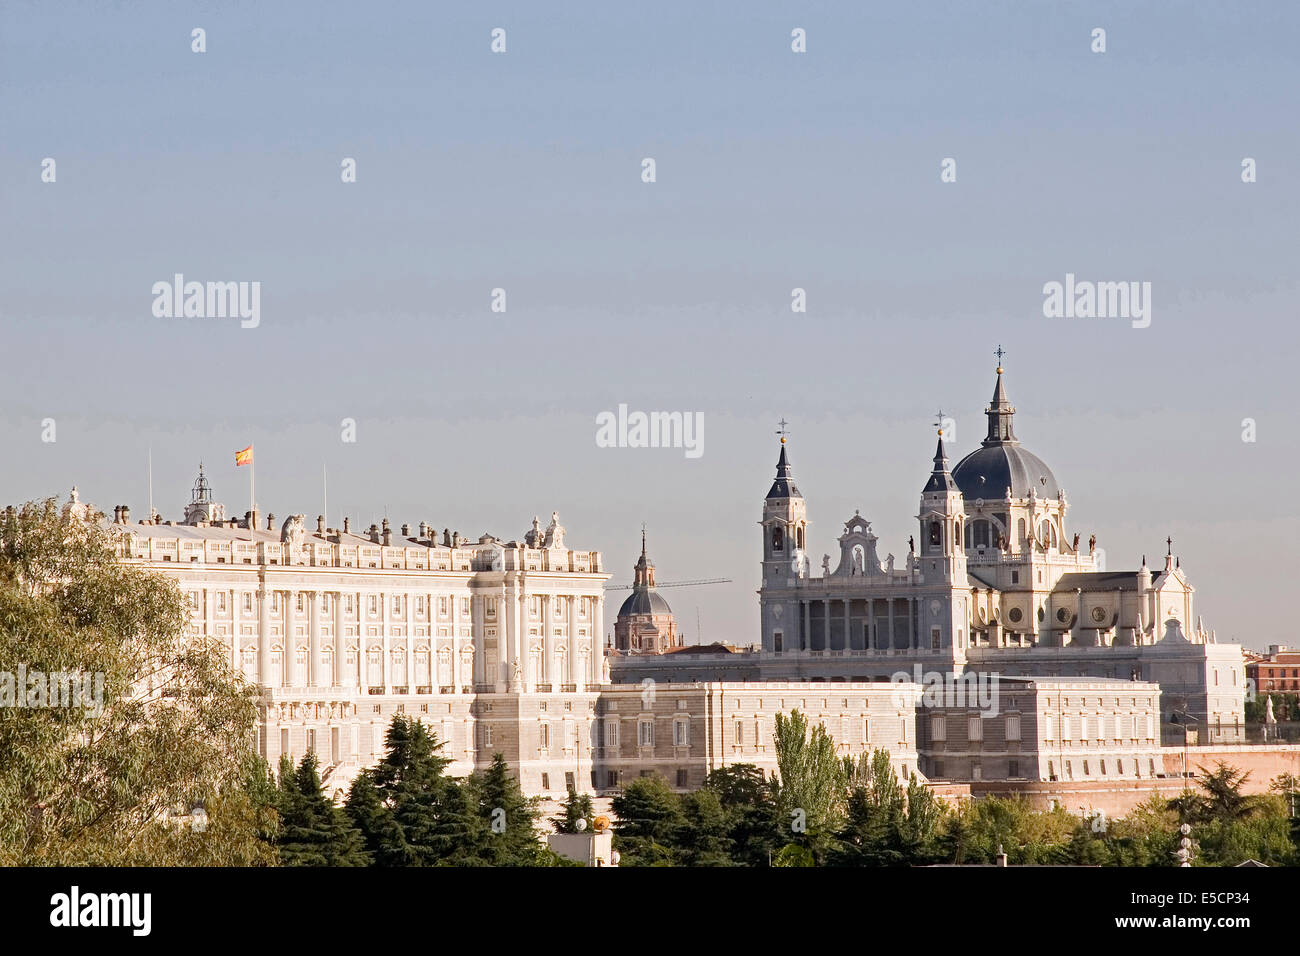 royal palace and almudena cathedral, madrid, spain Stock Photo